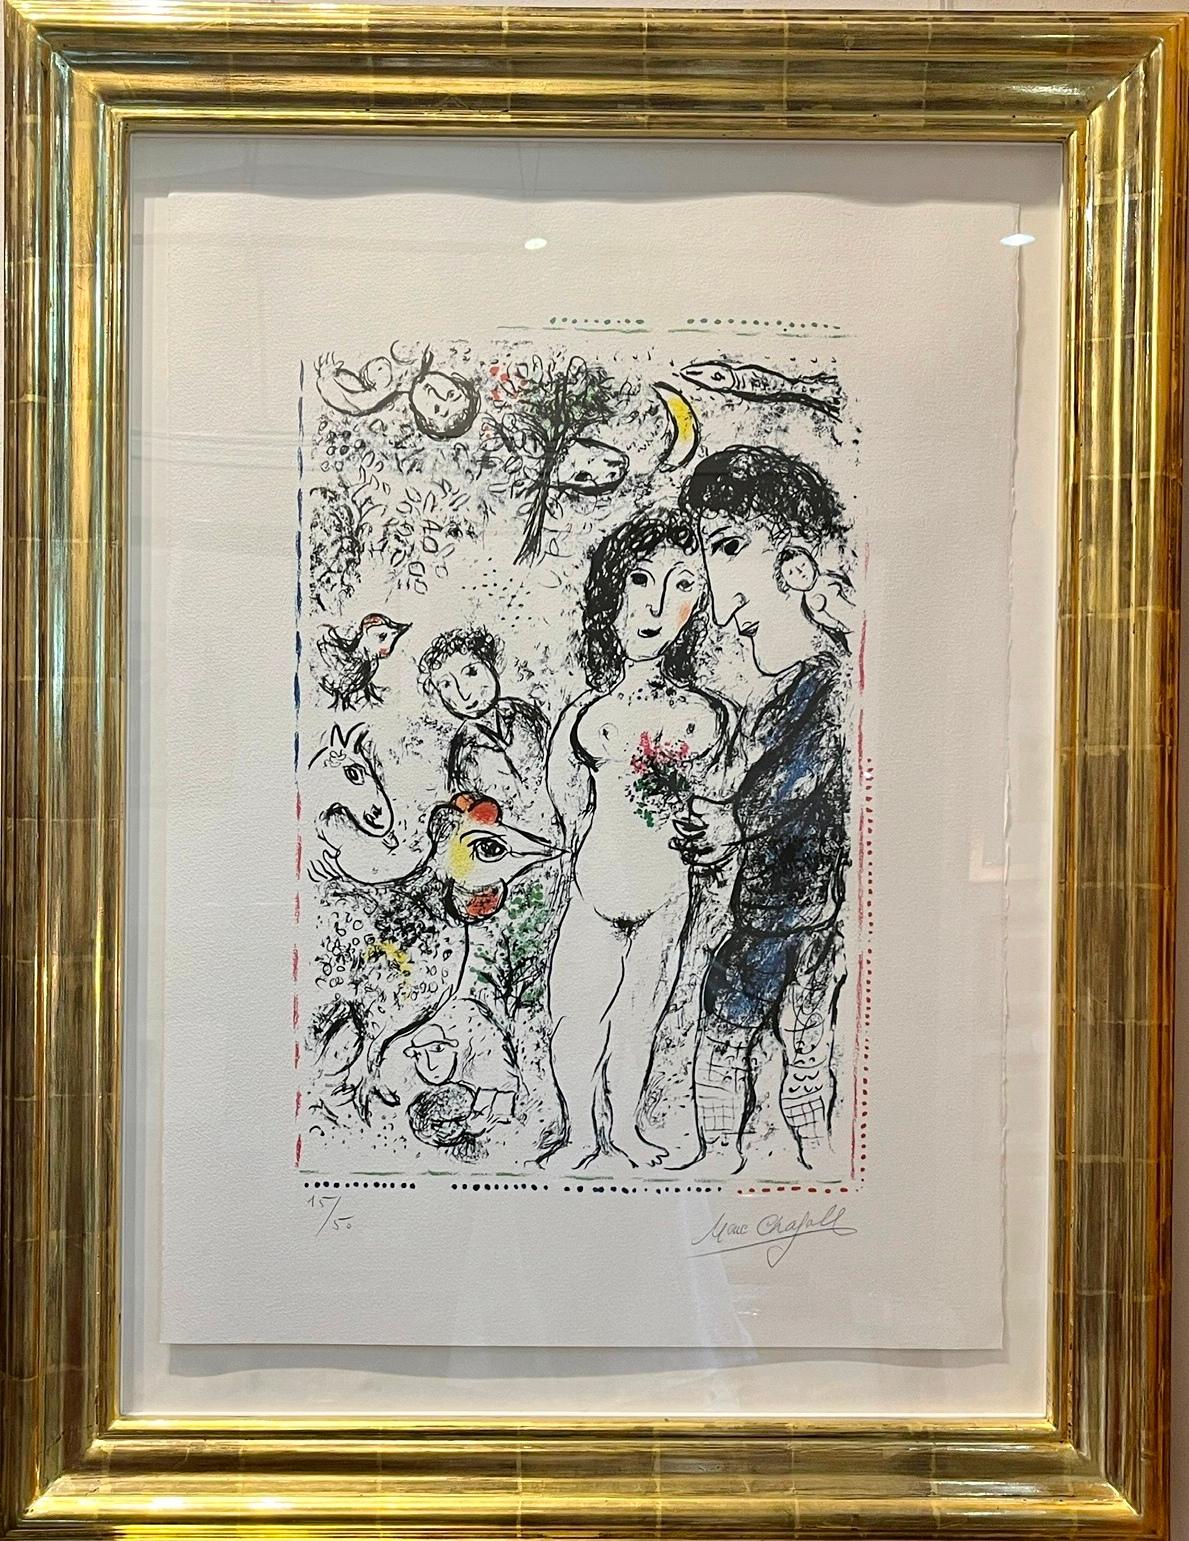 Colour lithograph, 1983, Signed and numbered 15 of a total edition of 50 copies in pencil, lower margin. Dimensions (image): 49.5 x 33 cm; 19 1/2×13 inches. Reference: Mourlot 1019.